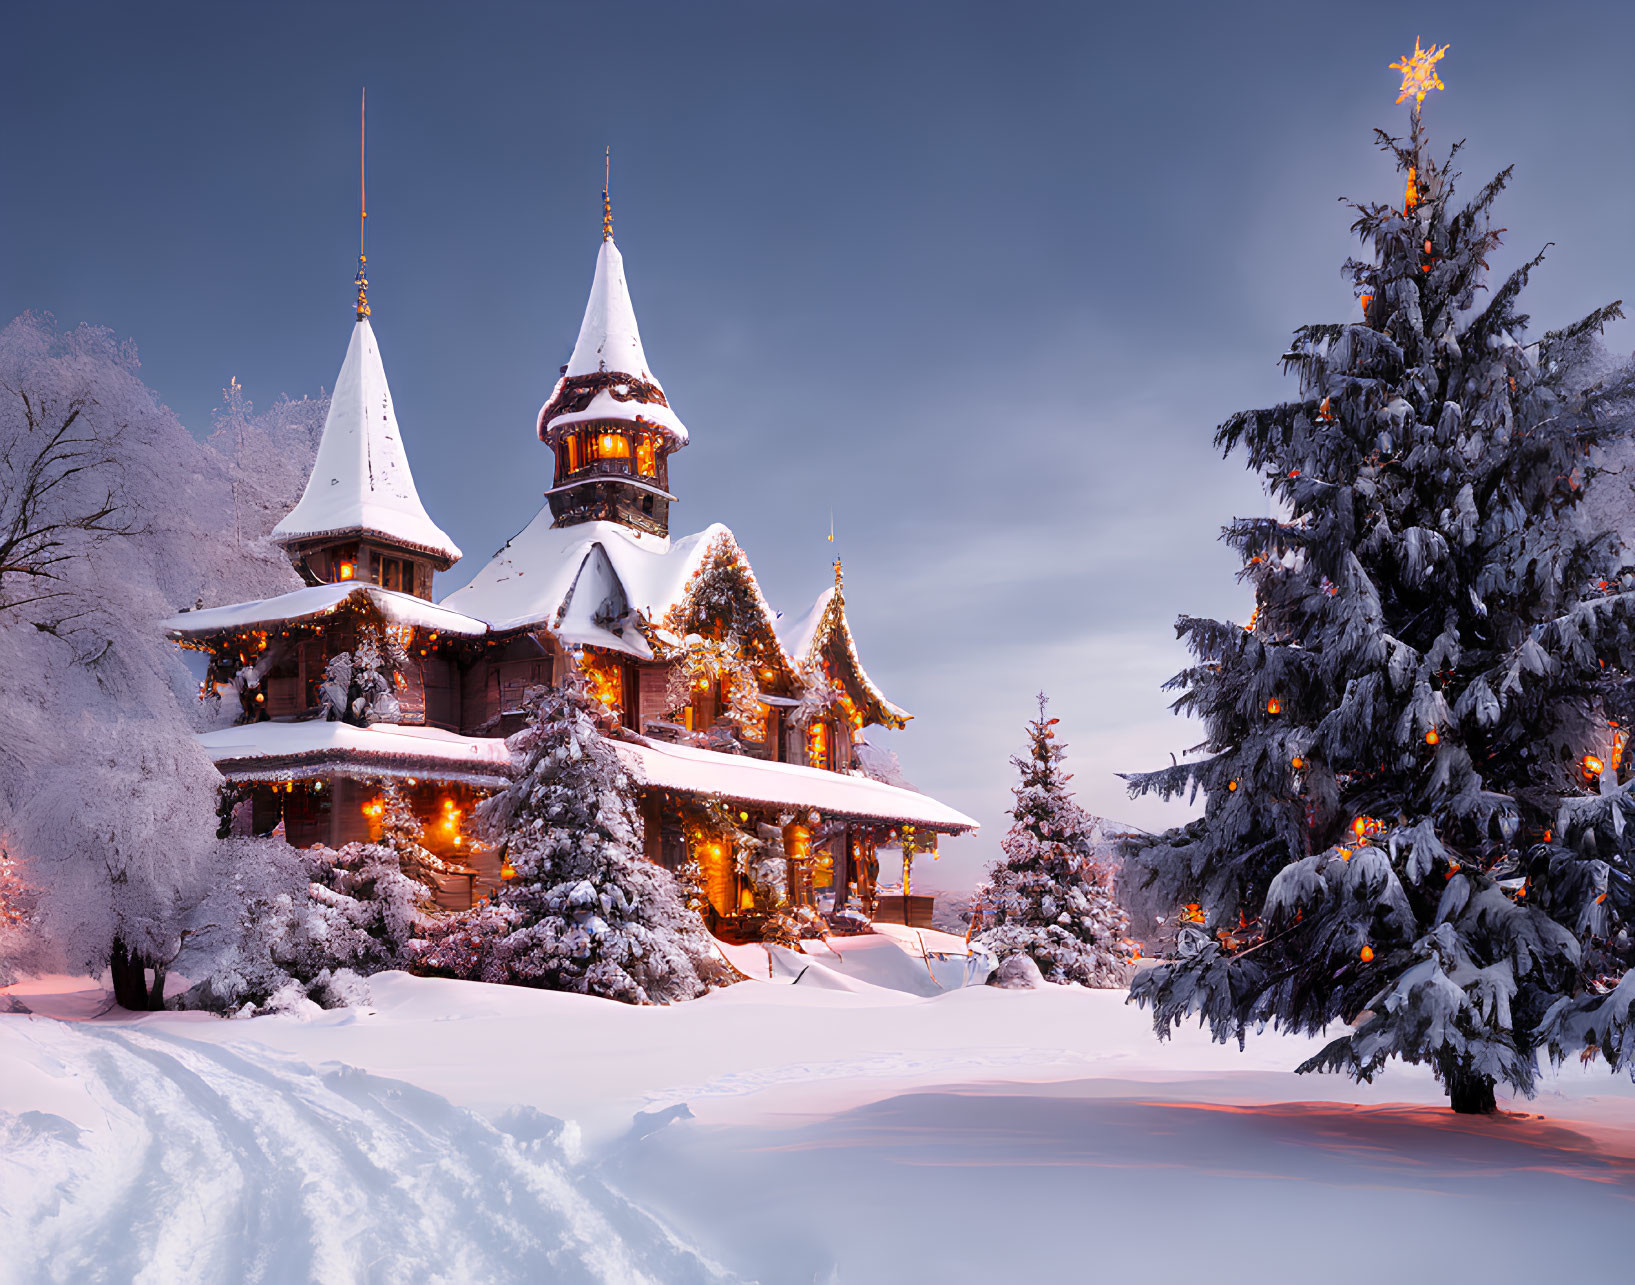 Snowy Twilight Scene: Decorated Chalet & Trees in Festive Winter Setting